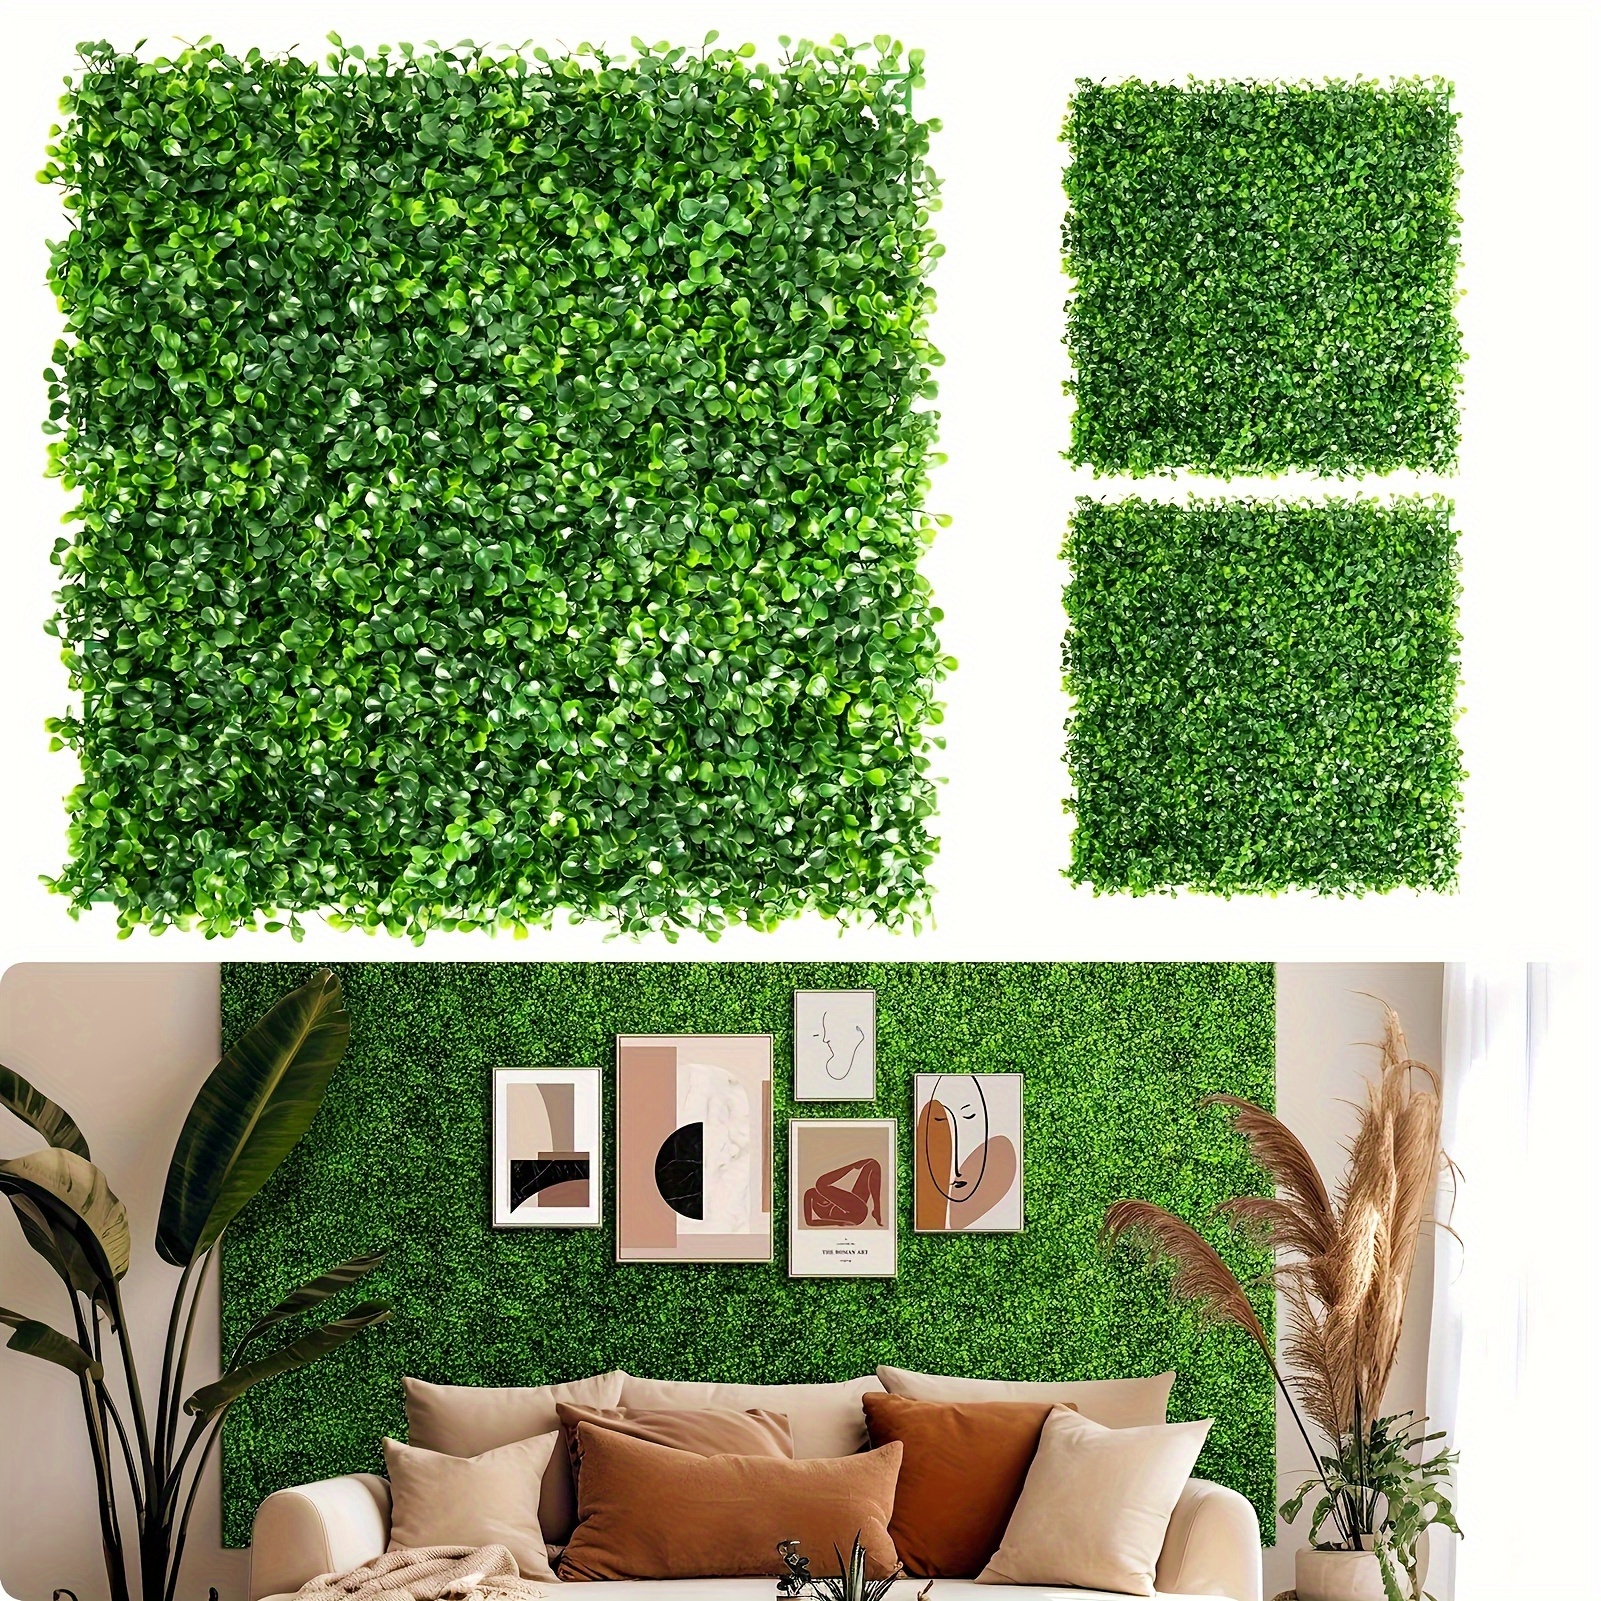 

1pc Artificial Grass Wall Panels, Boxwood Wall Panels For Indoor Or Outdoor Wall Decor, Garden Fence Grass Background Wall Panels, Green Plant Wall Home Decor